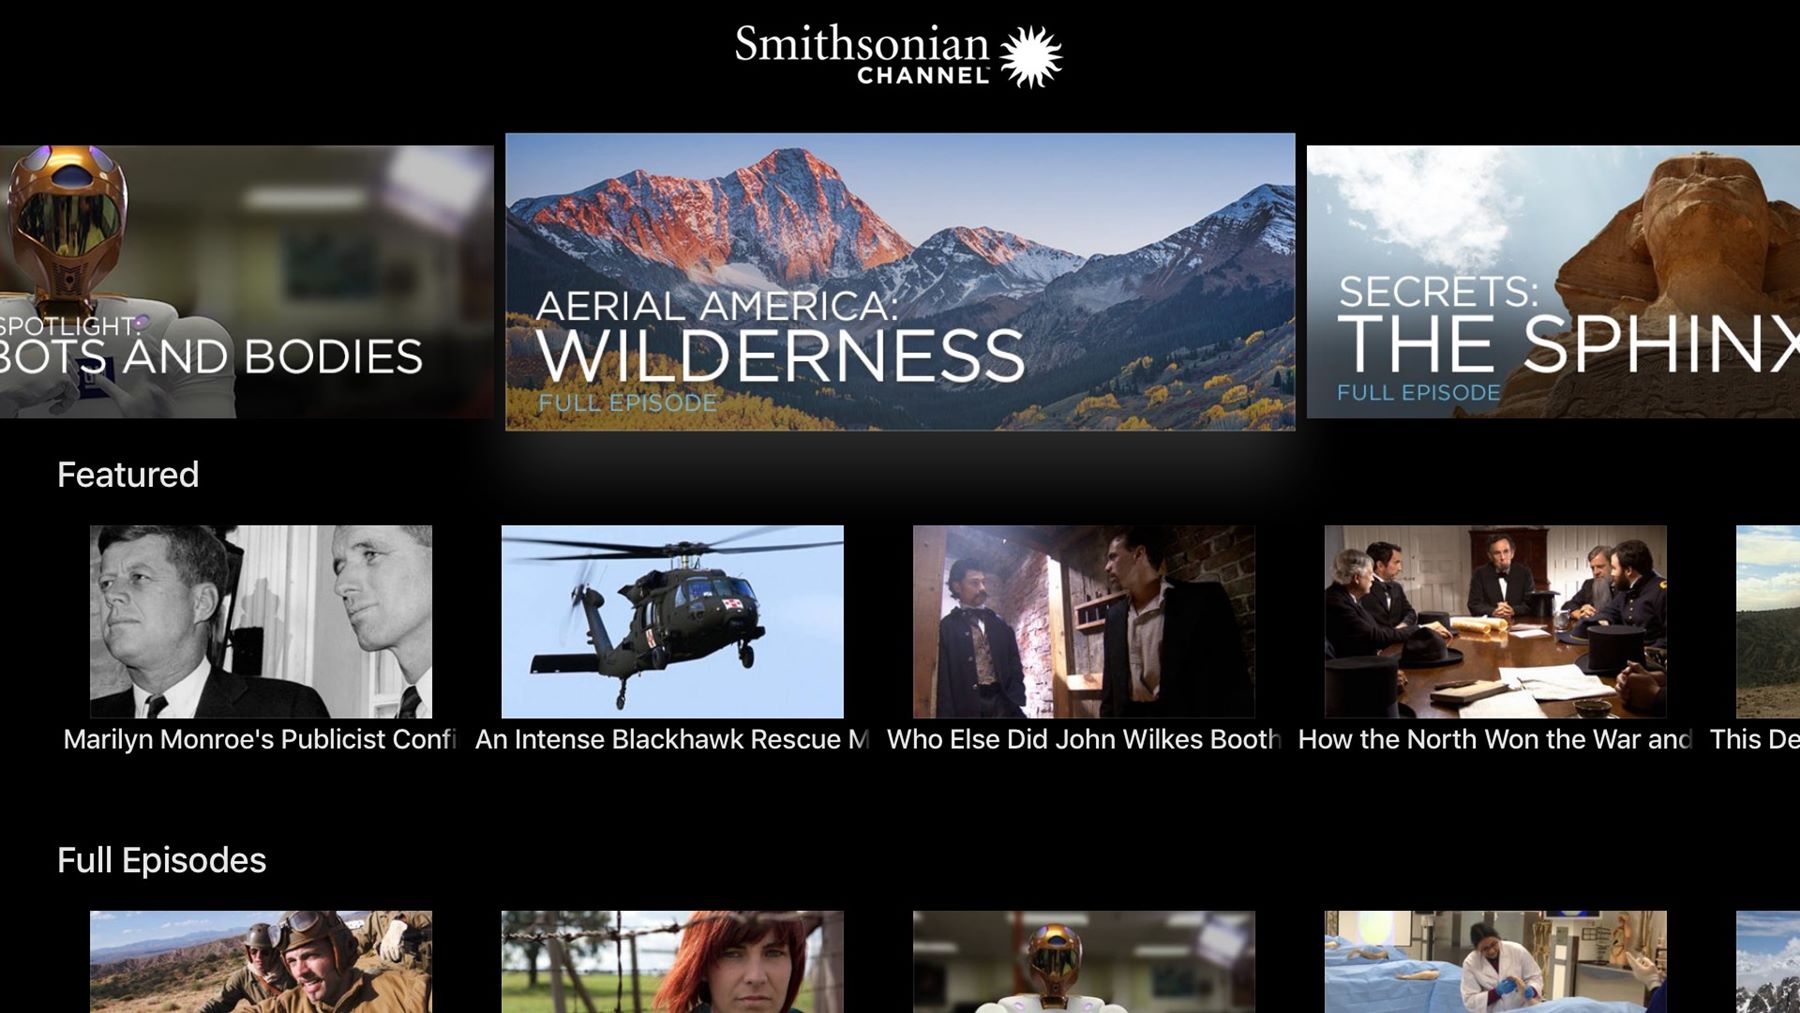 How To Watch Smithsonian Channel On Amazon Prime